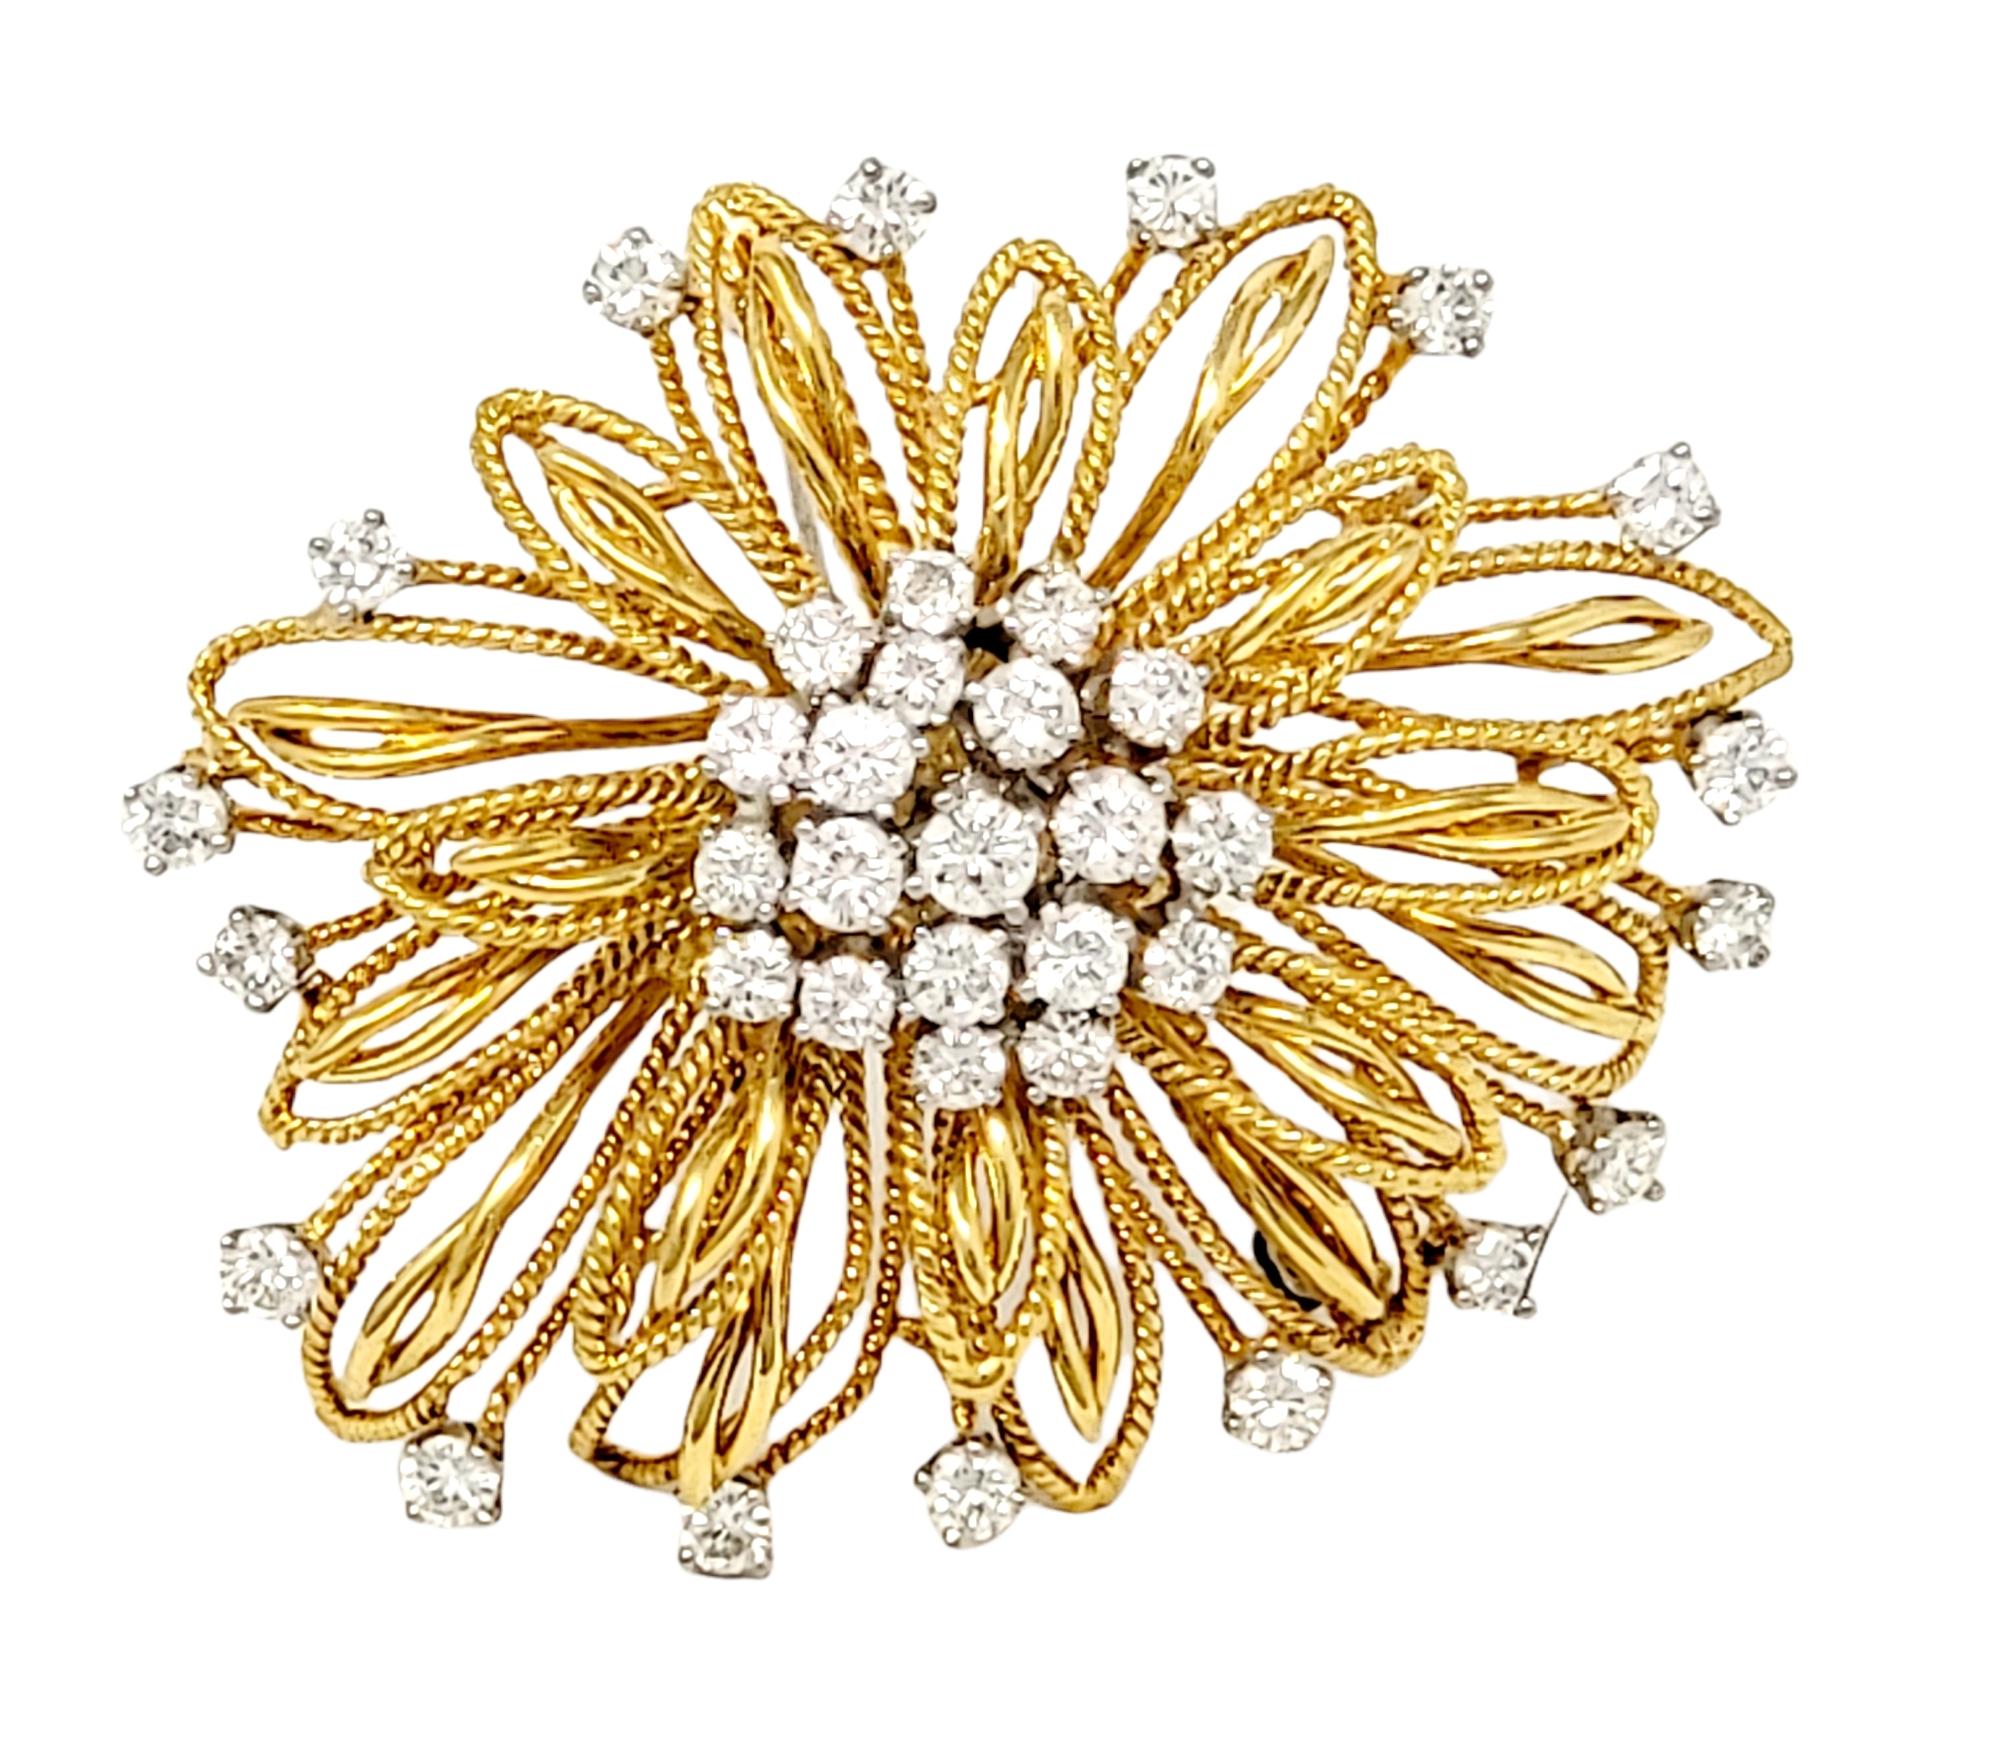 Contemporary Diamond Floral Motif Brooch 18 Karat Yellow Gold and Platinum 3.02 Carats Total For Sale